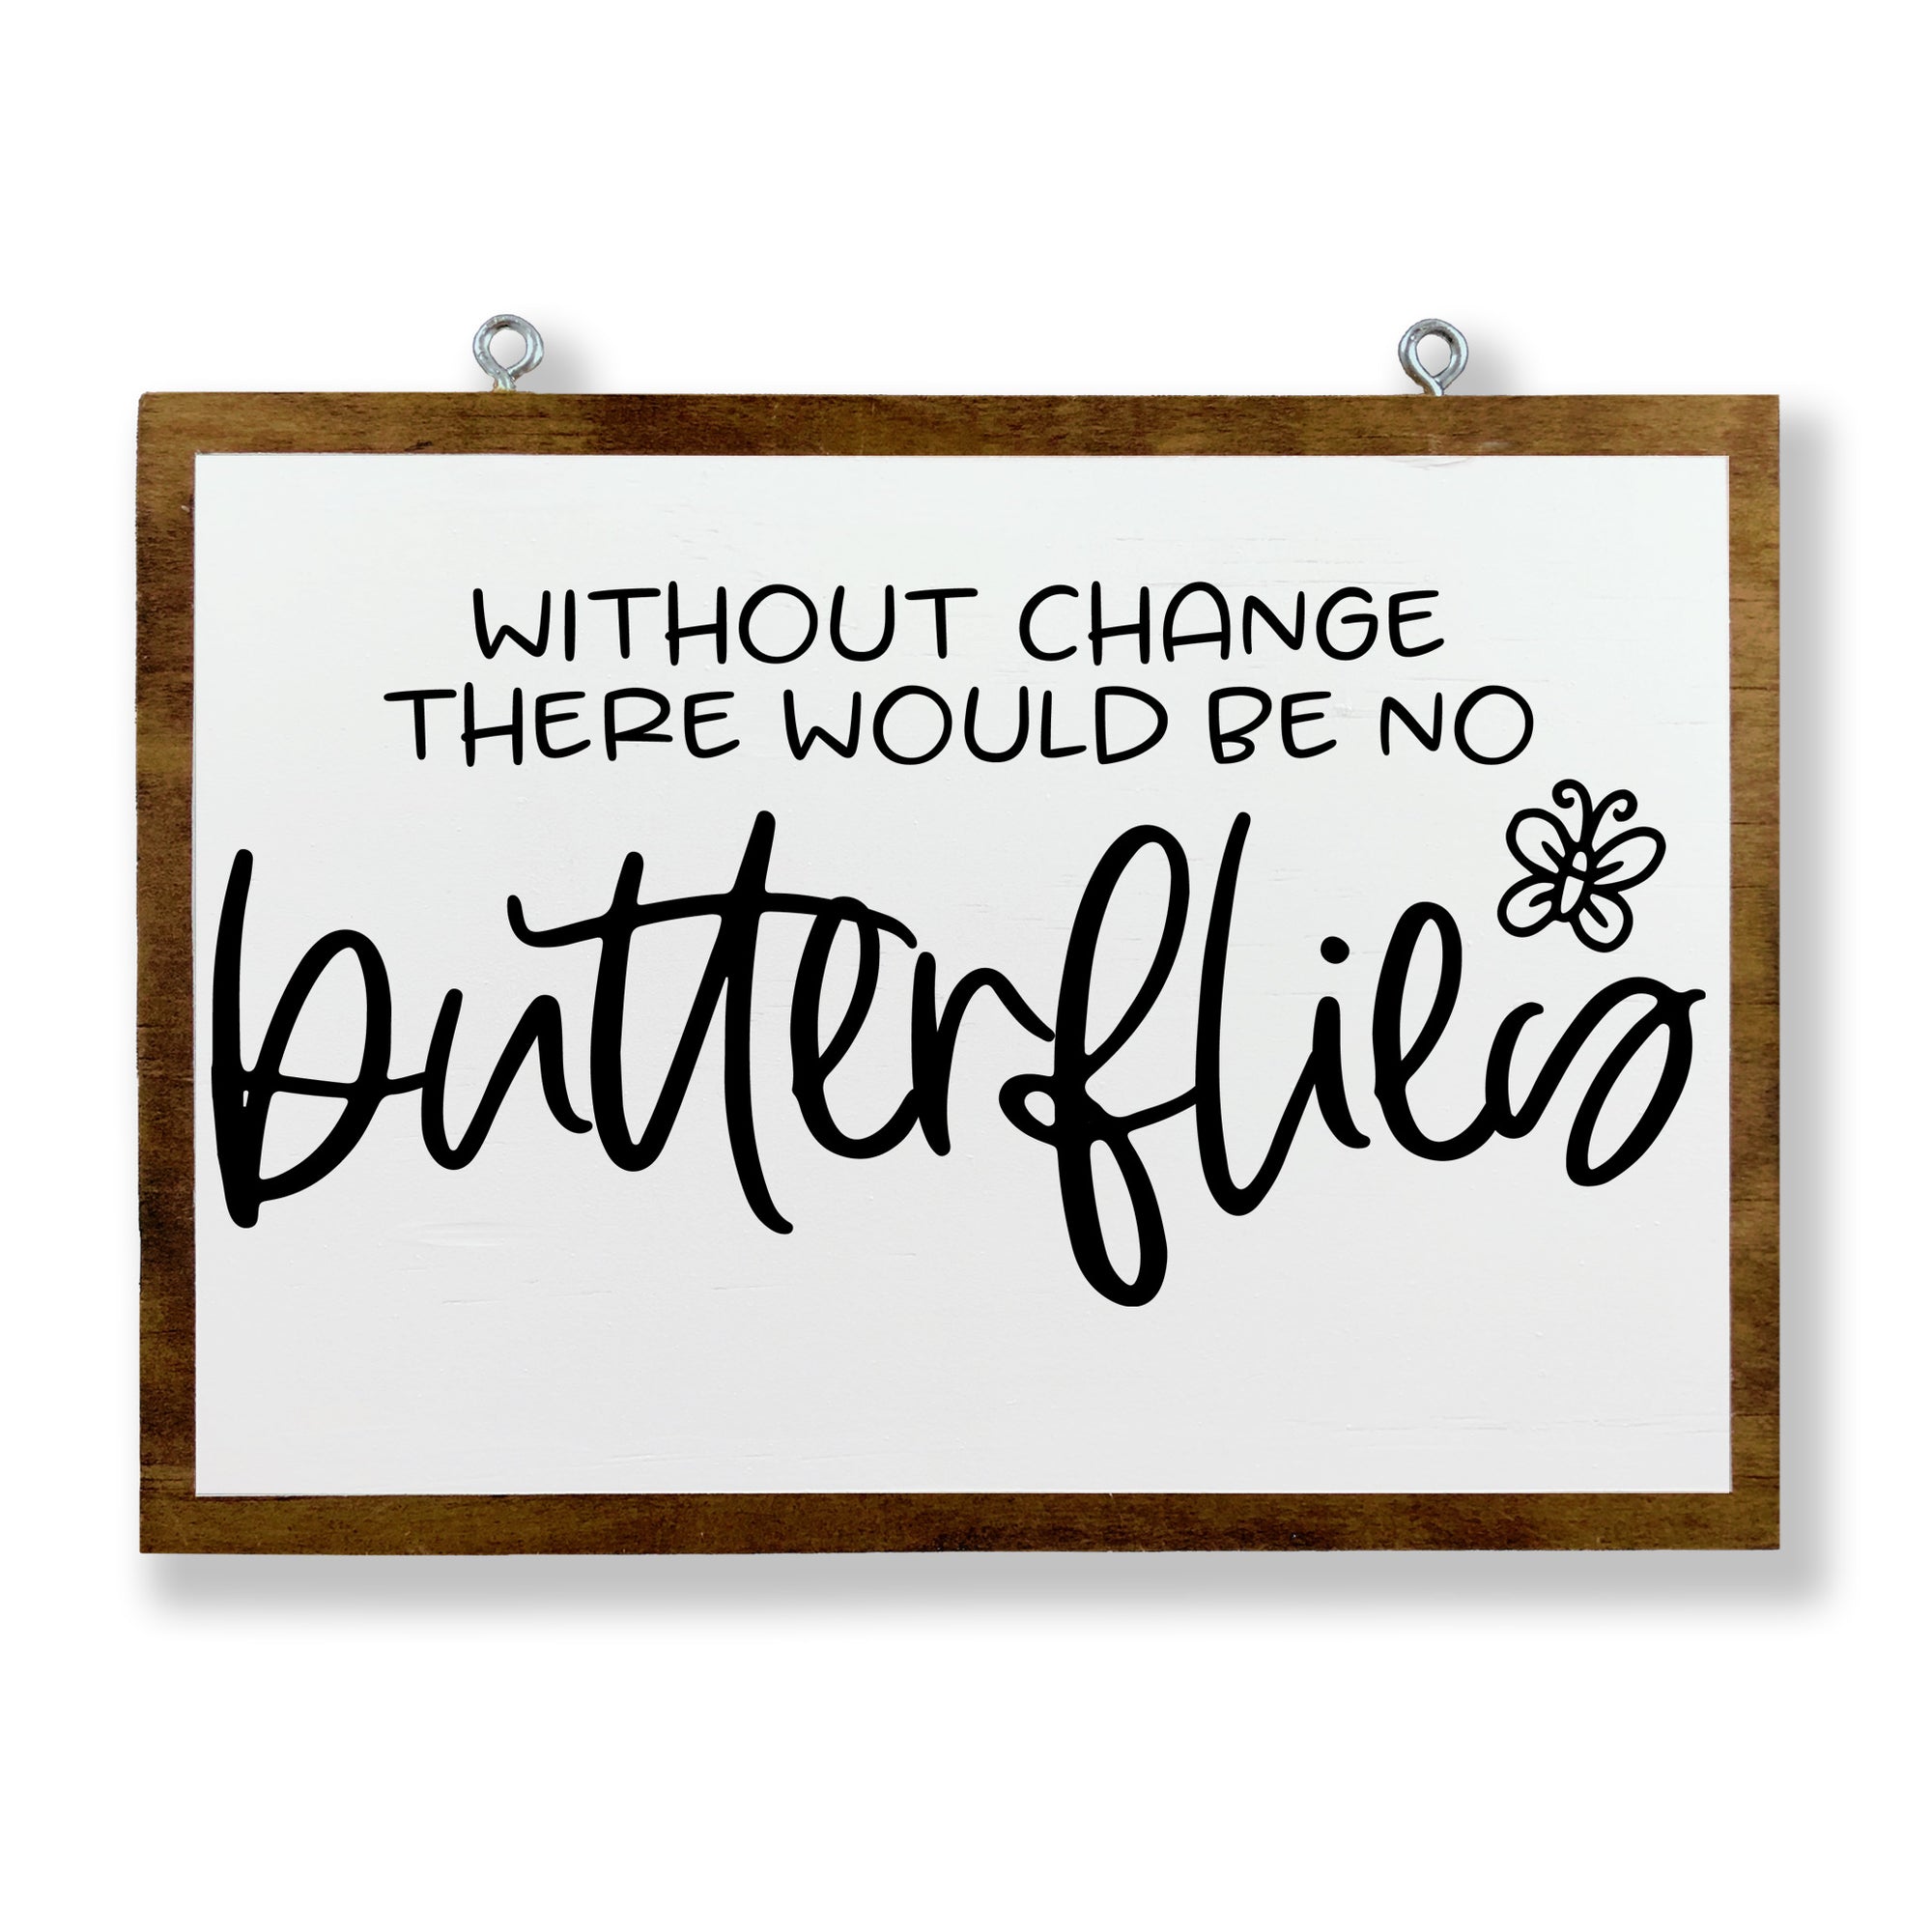 Without Change There Would Be No Butterflies